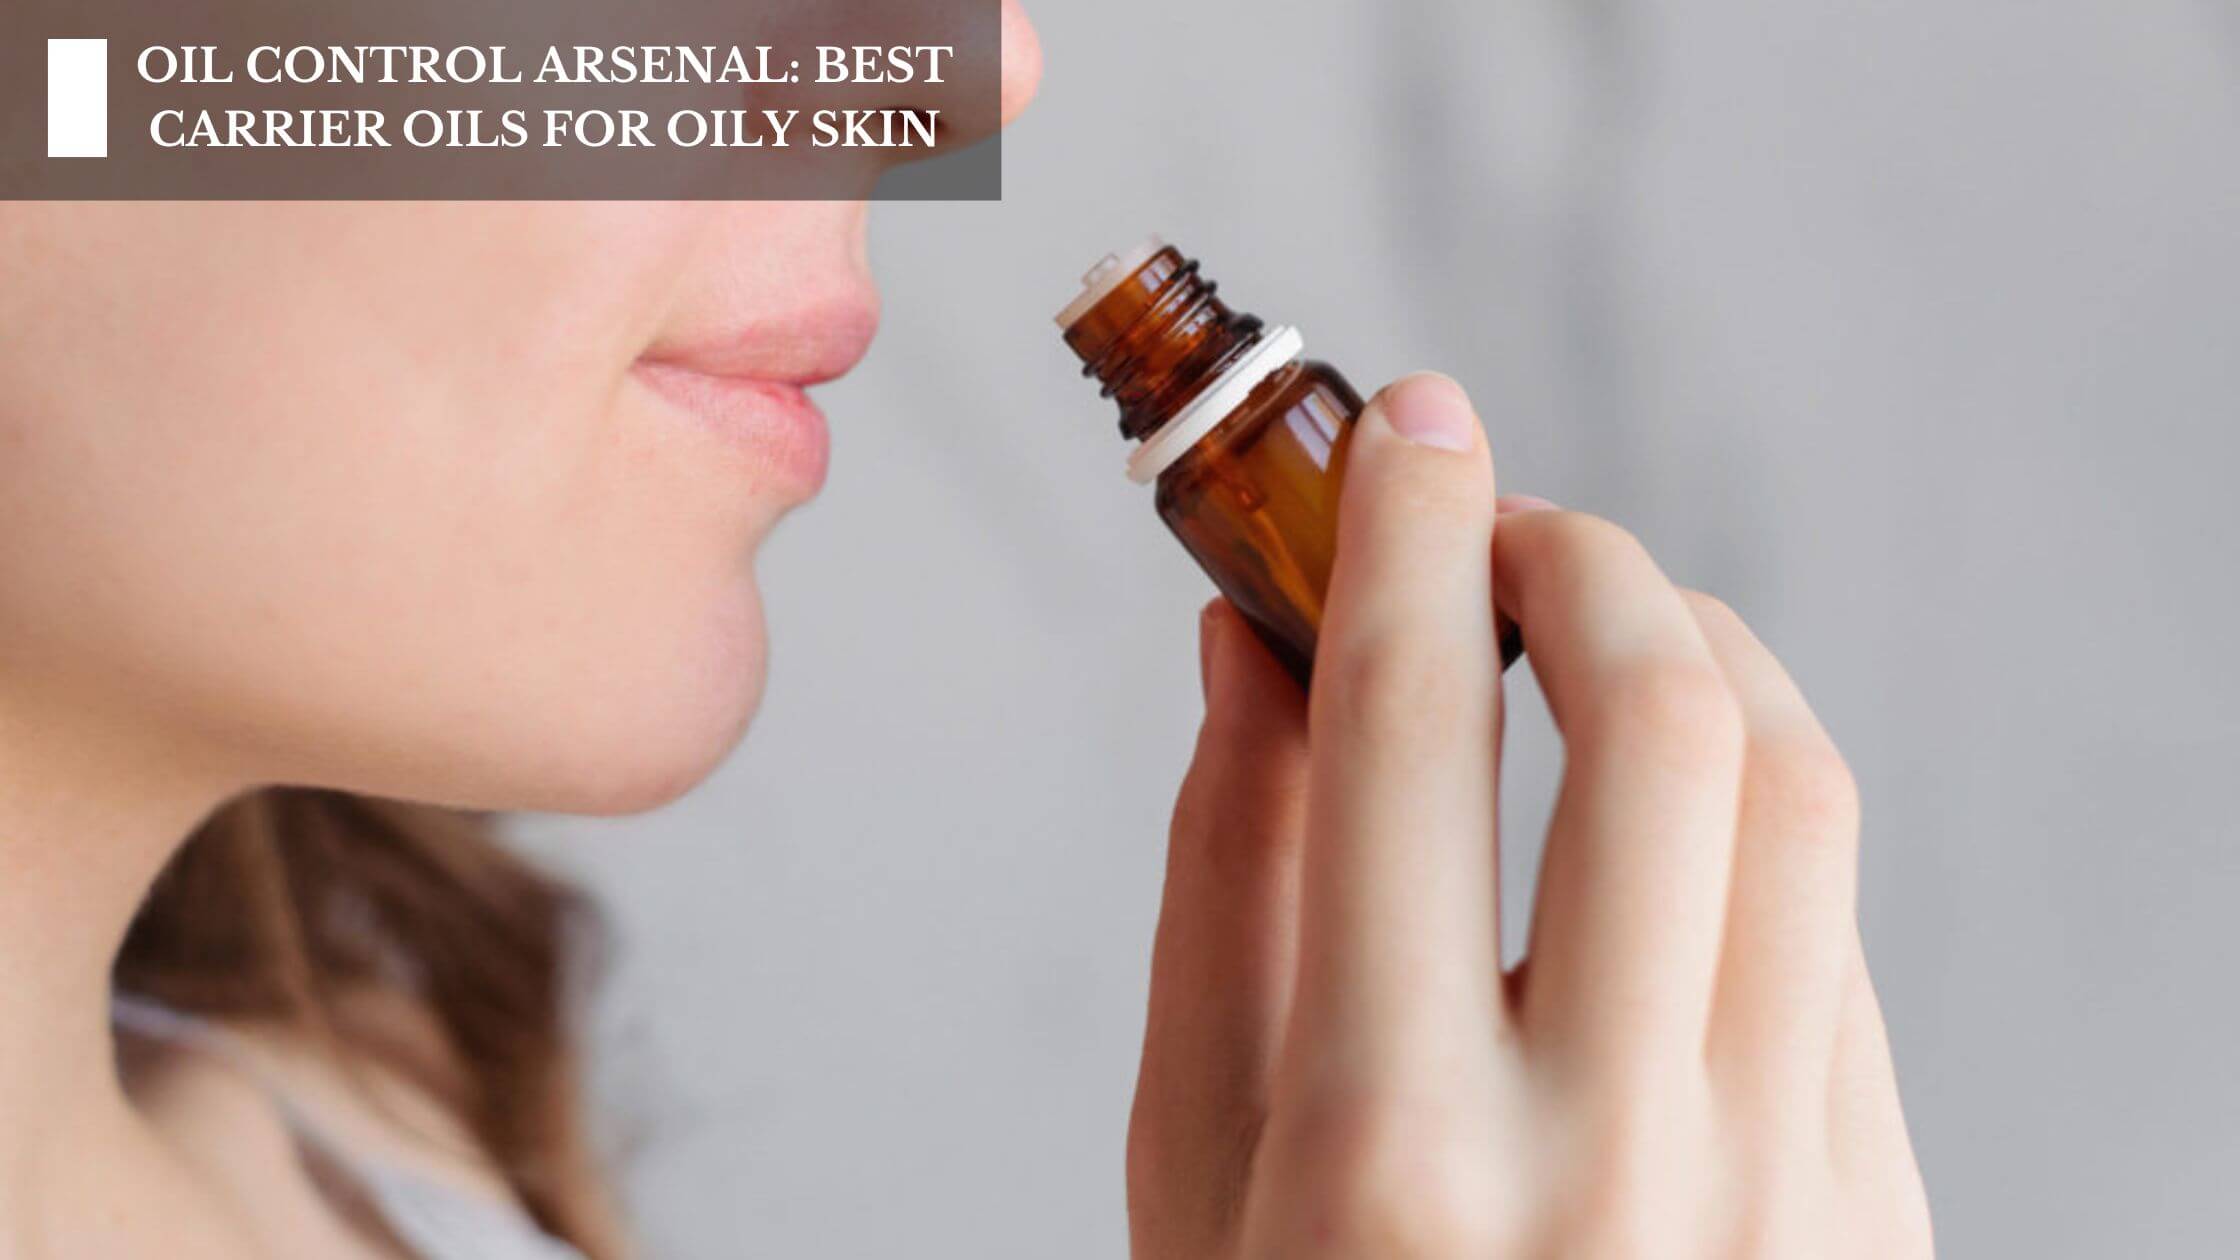 Essential Oils for Skin Care: Why Carrier Oils are Important